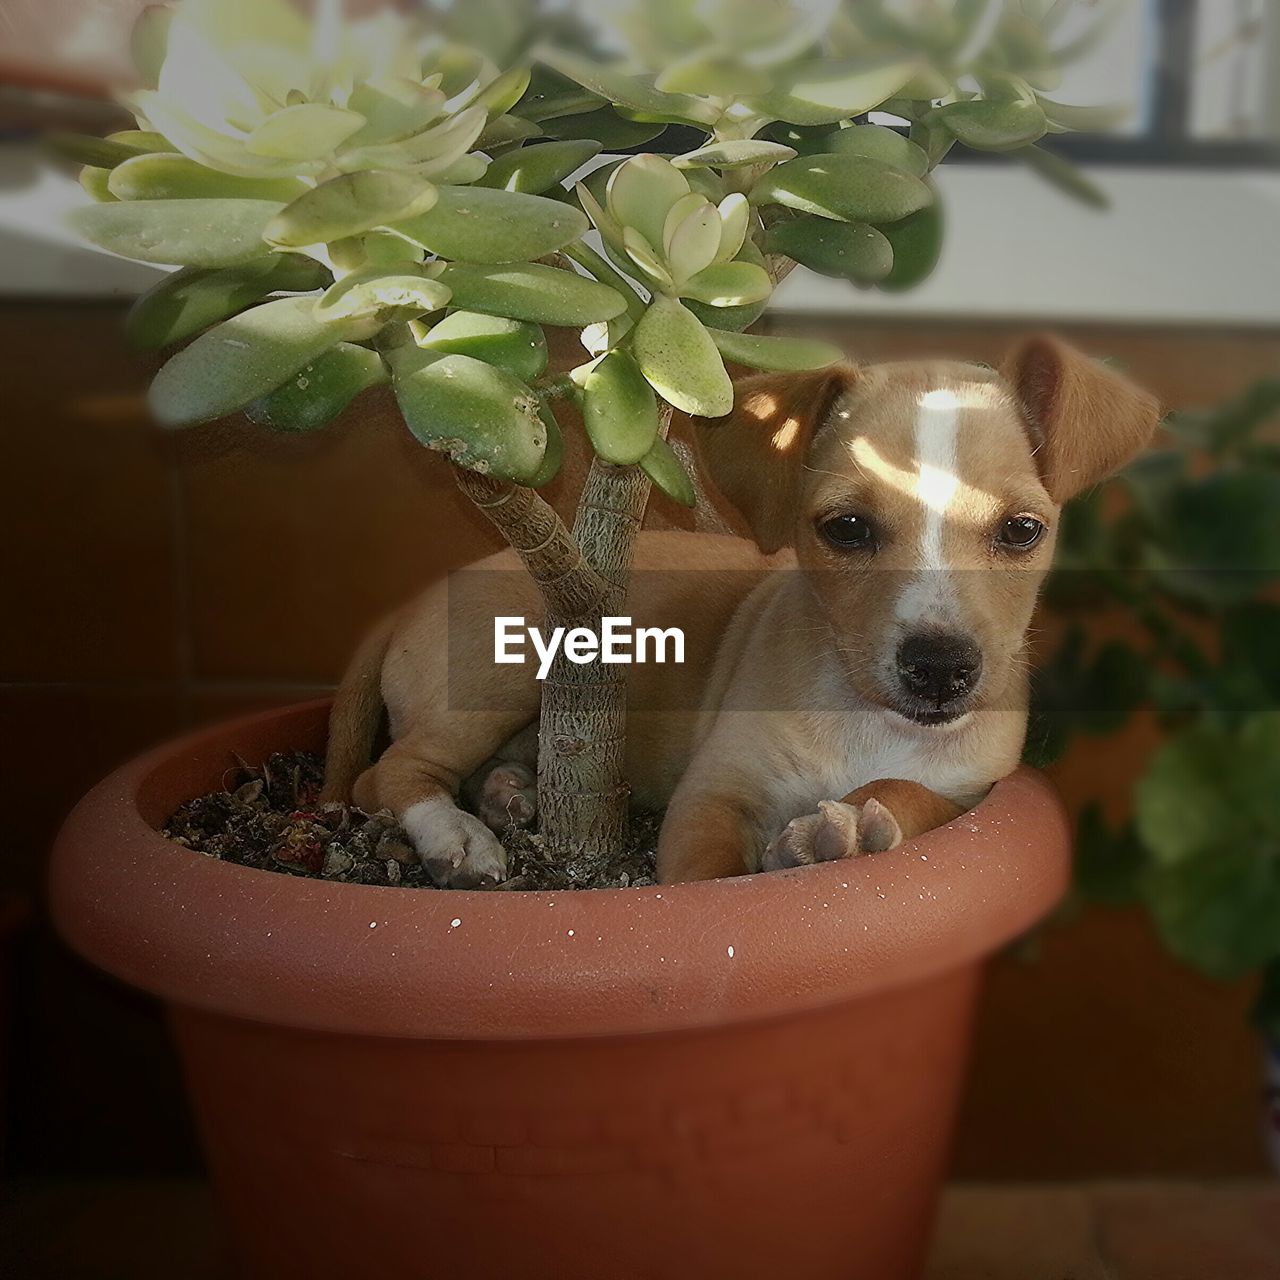 Dog sitting in potted plant